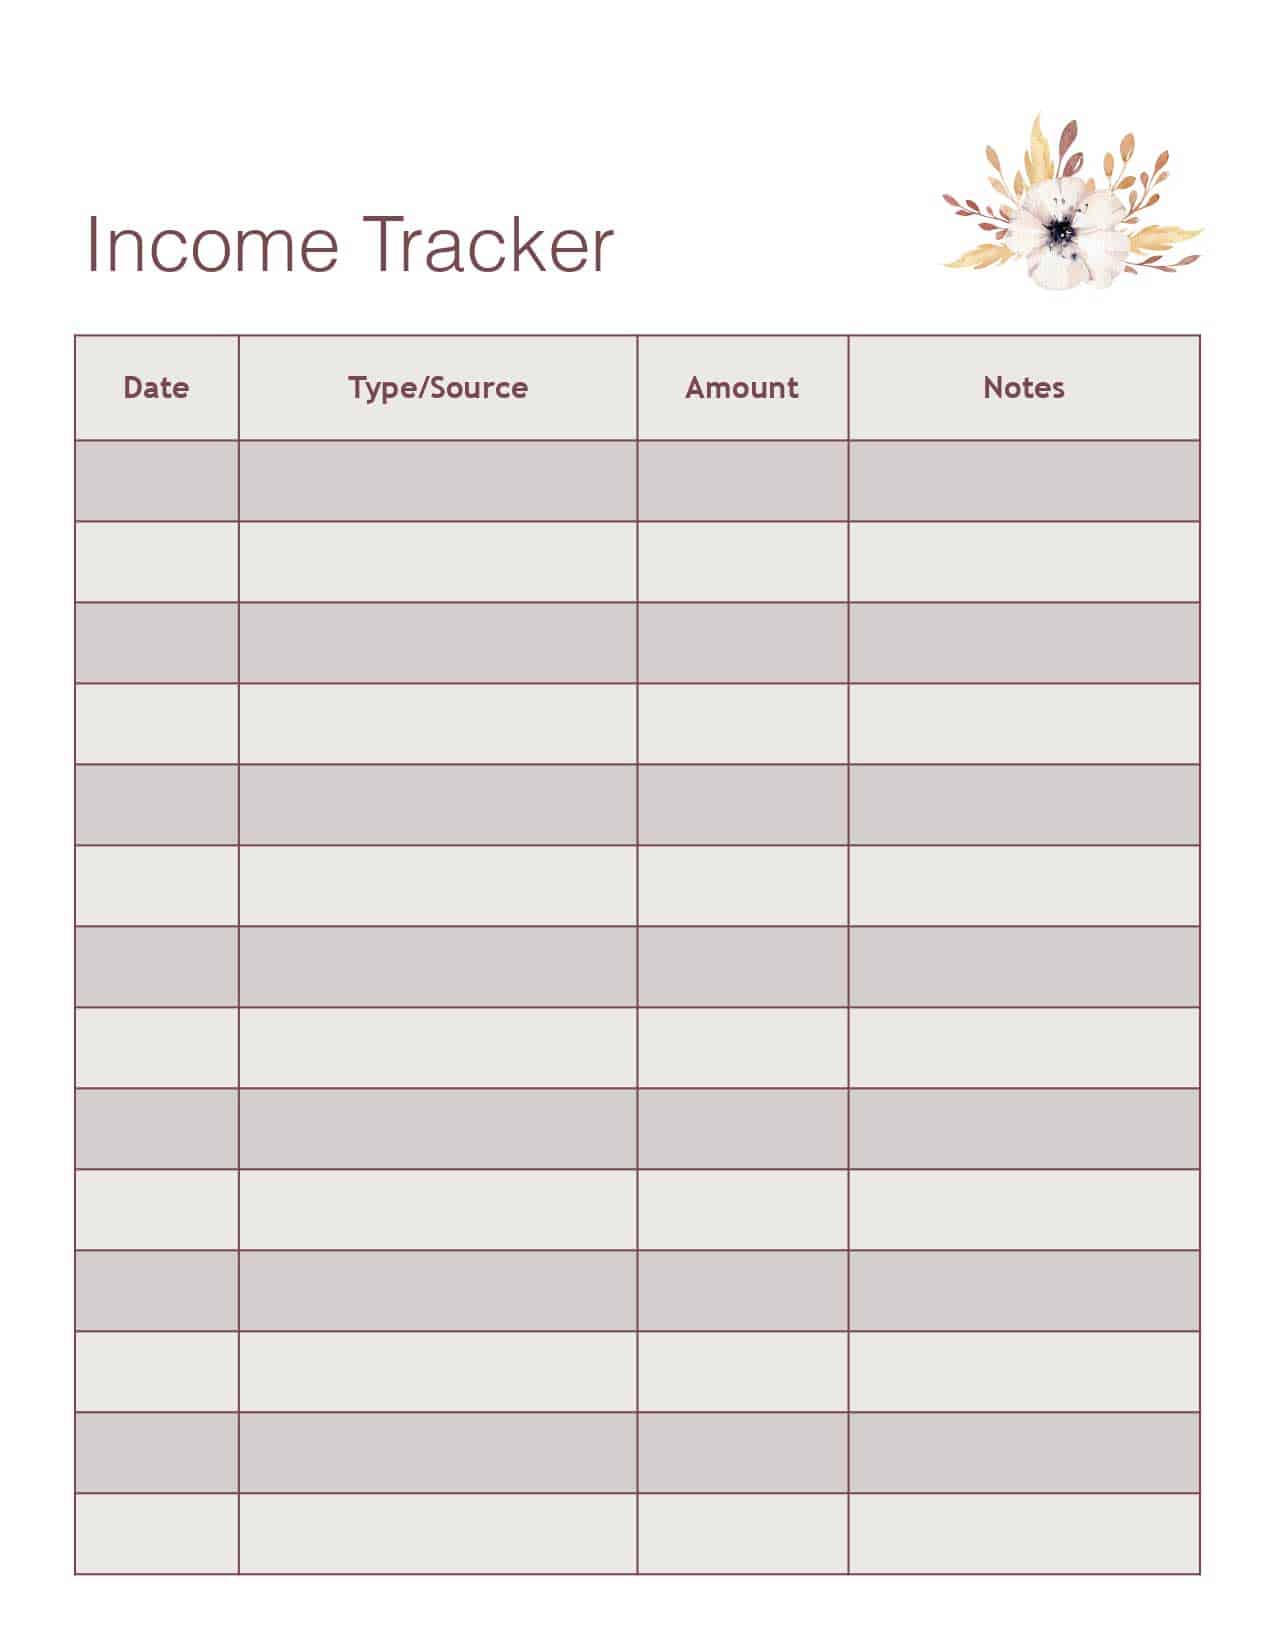 Keep track of your income with this free tracker printable